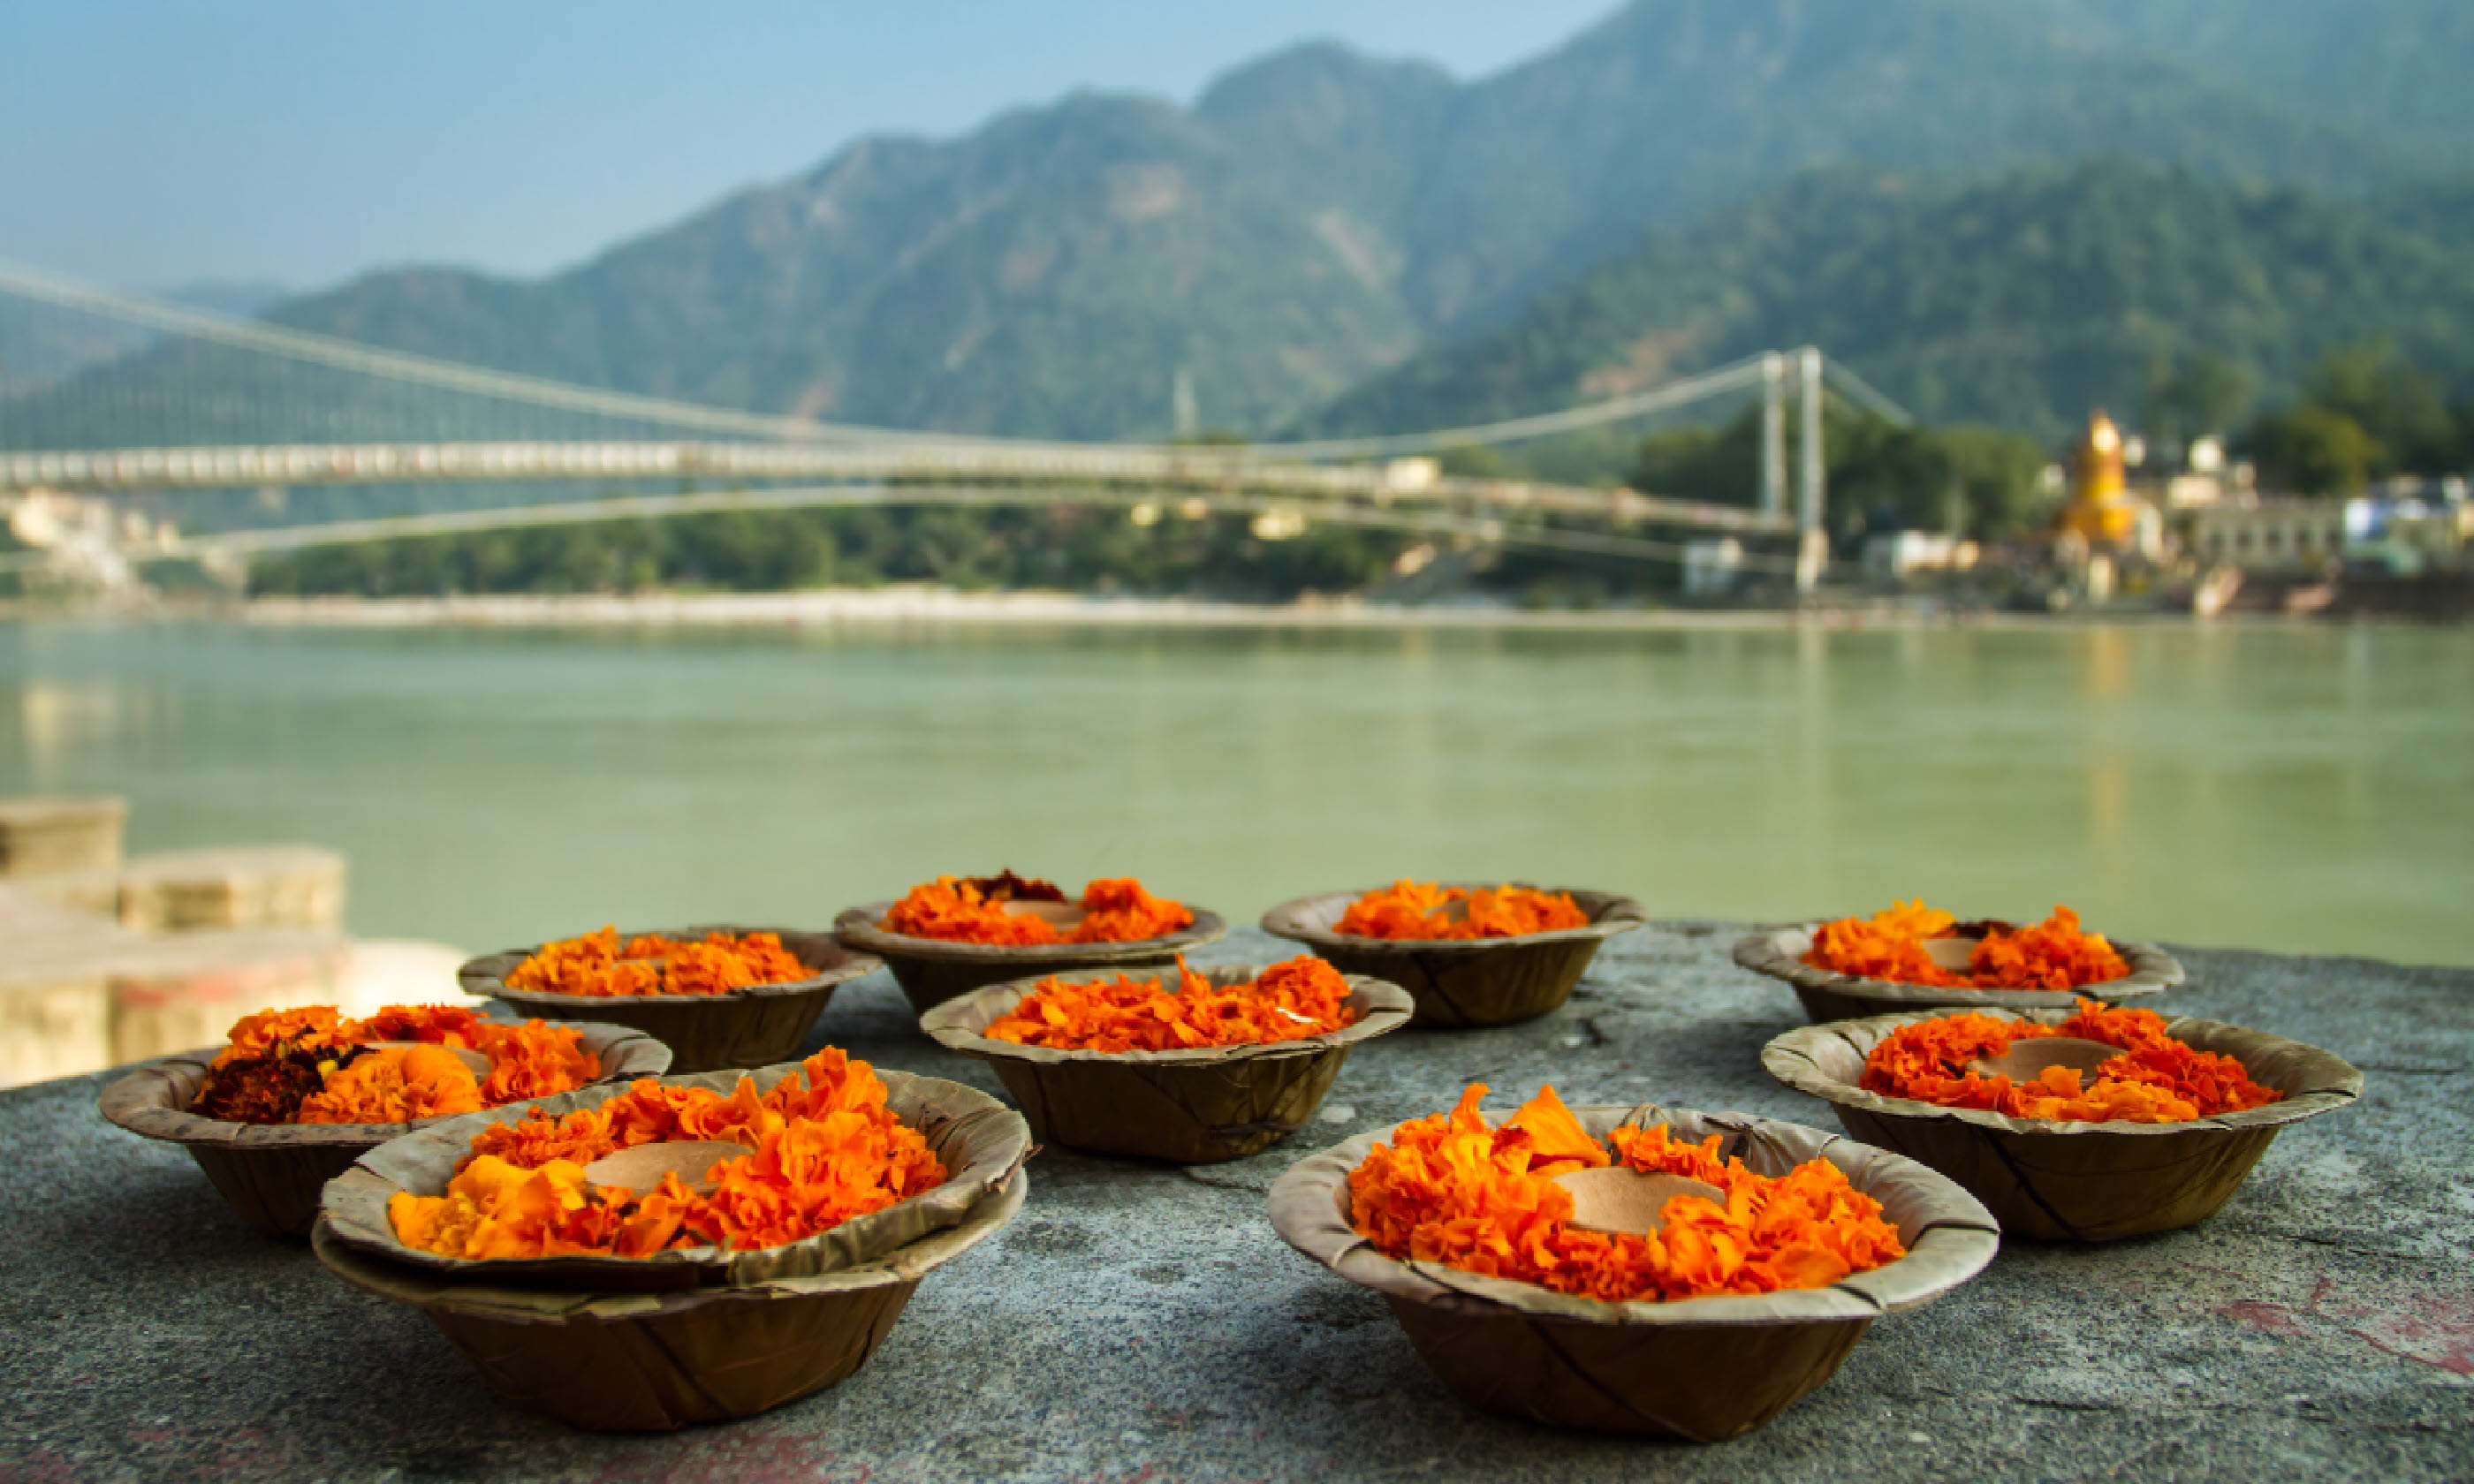 Puja flowers offering for the Ganges river in Rishikesh (Shutterstock)